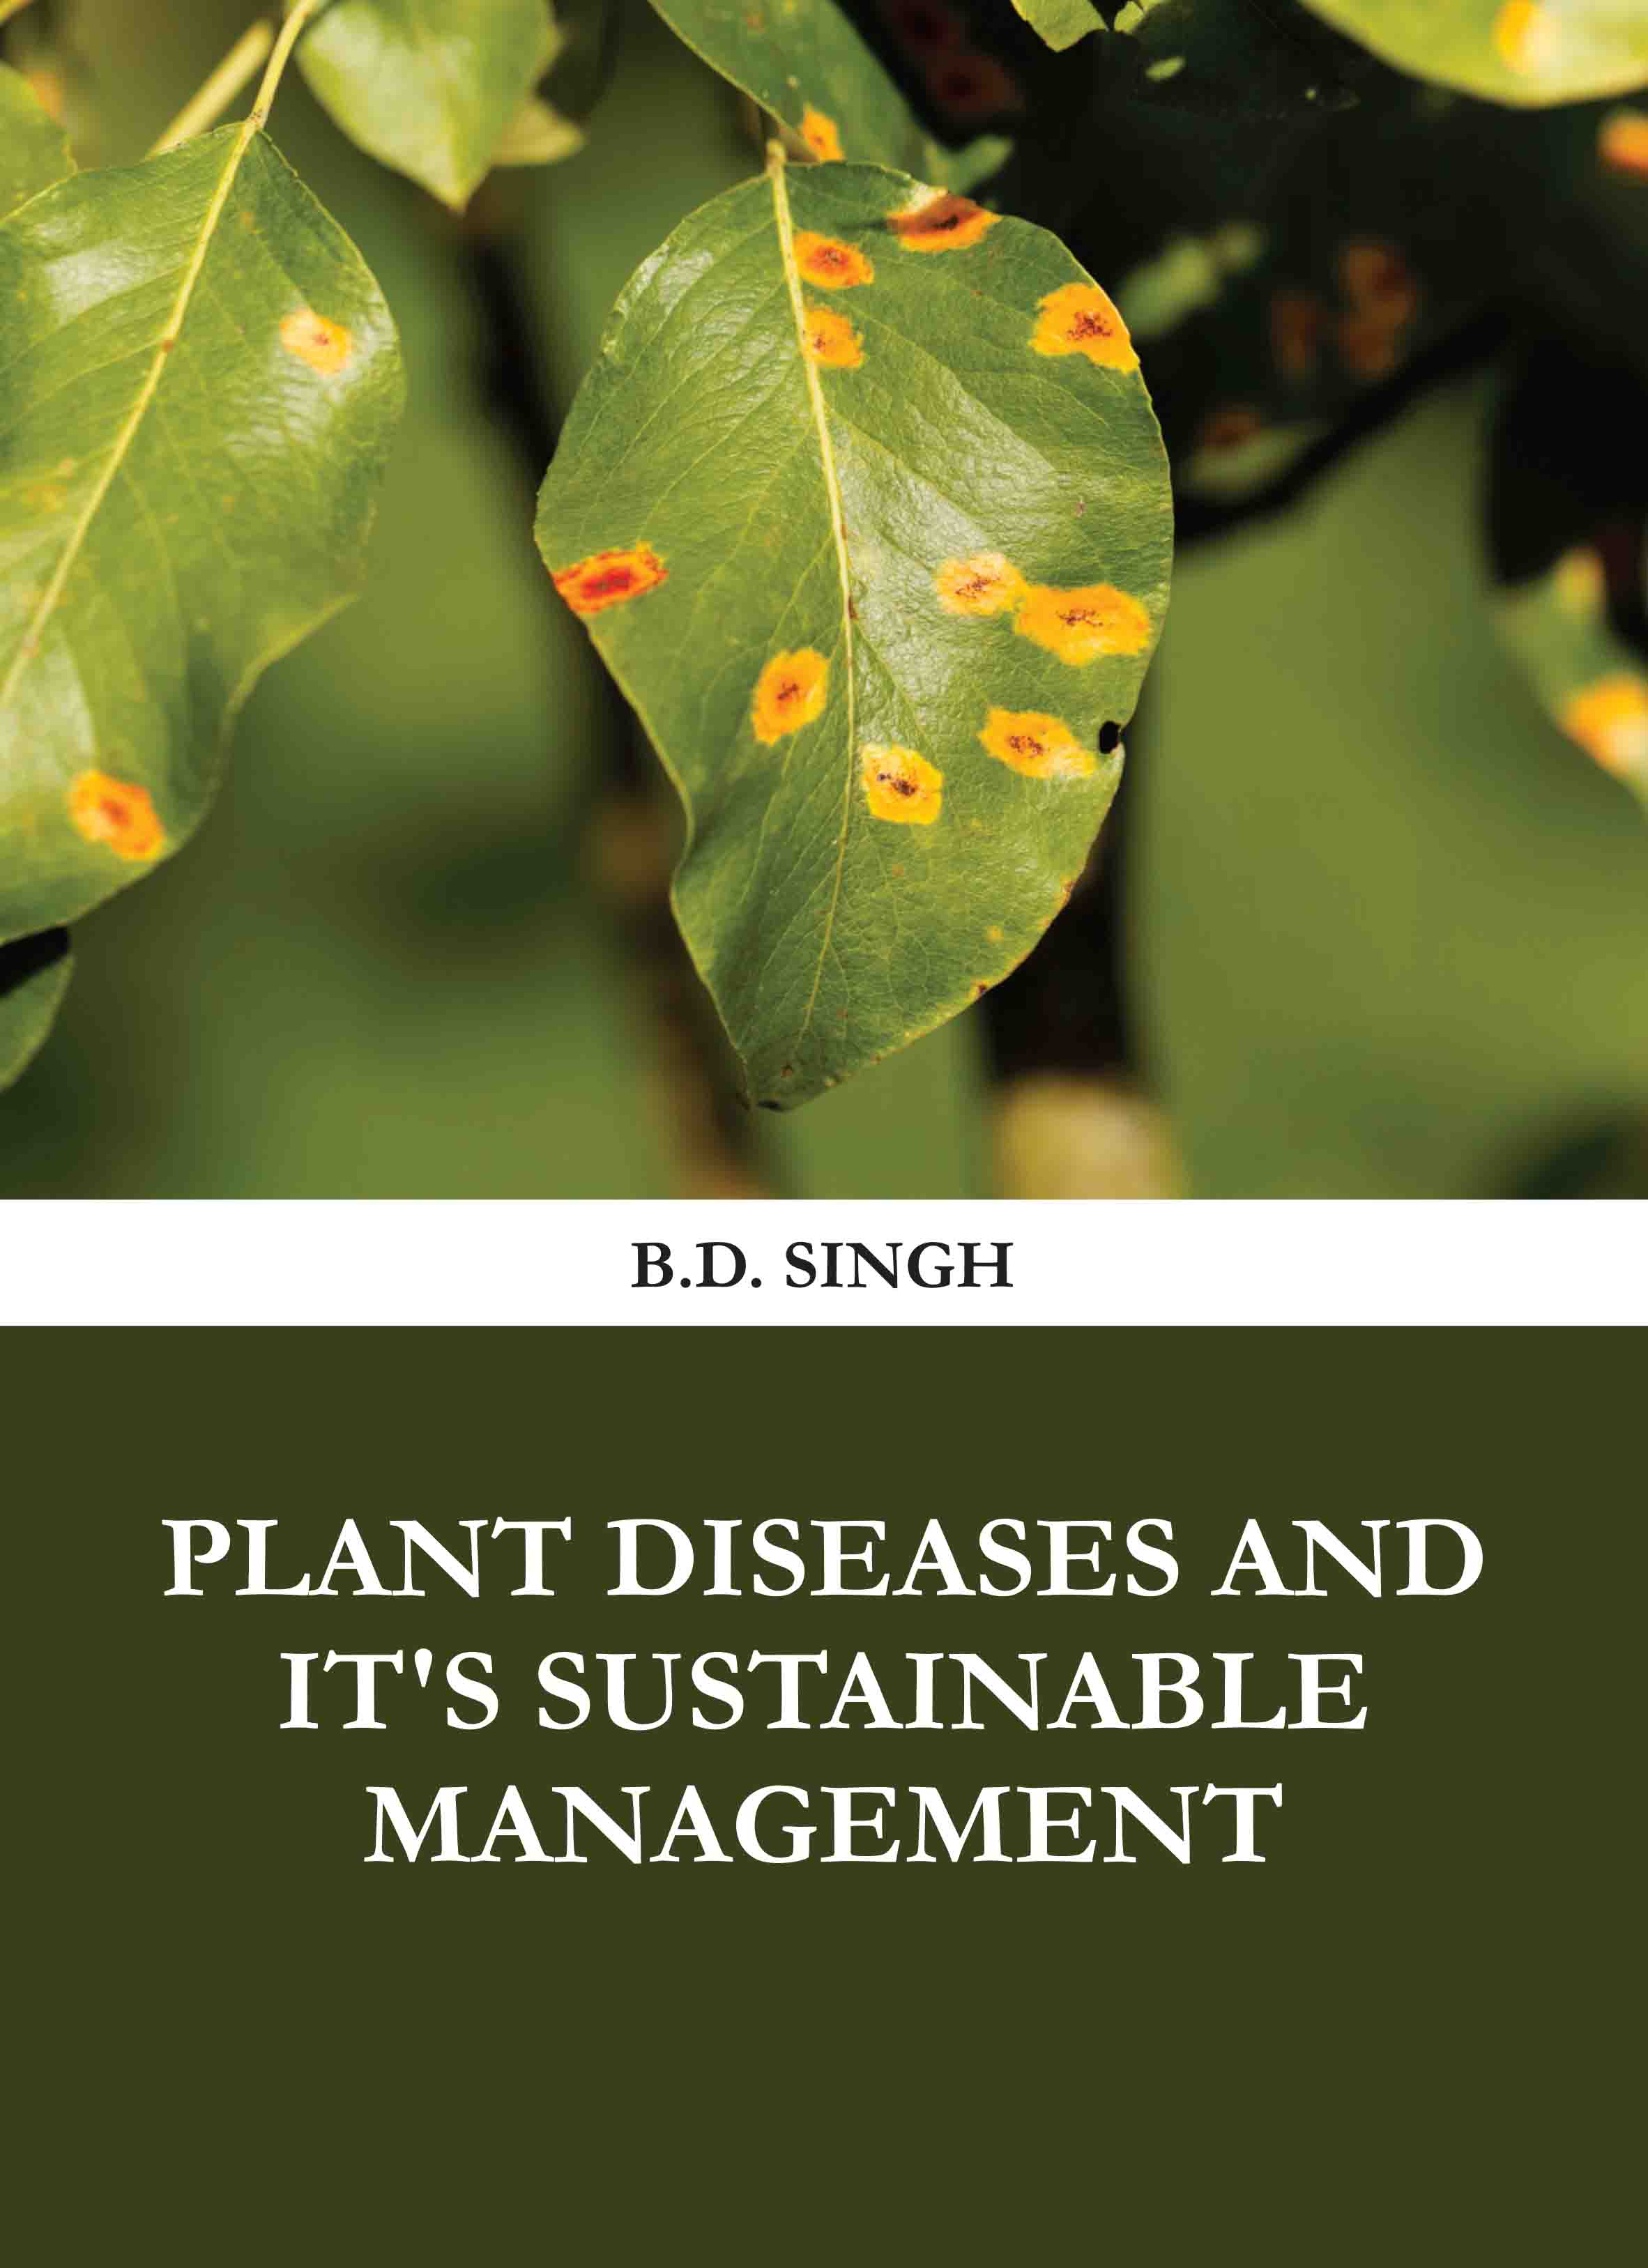 Plant Diseases and It's Sustainable Management